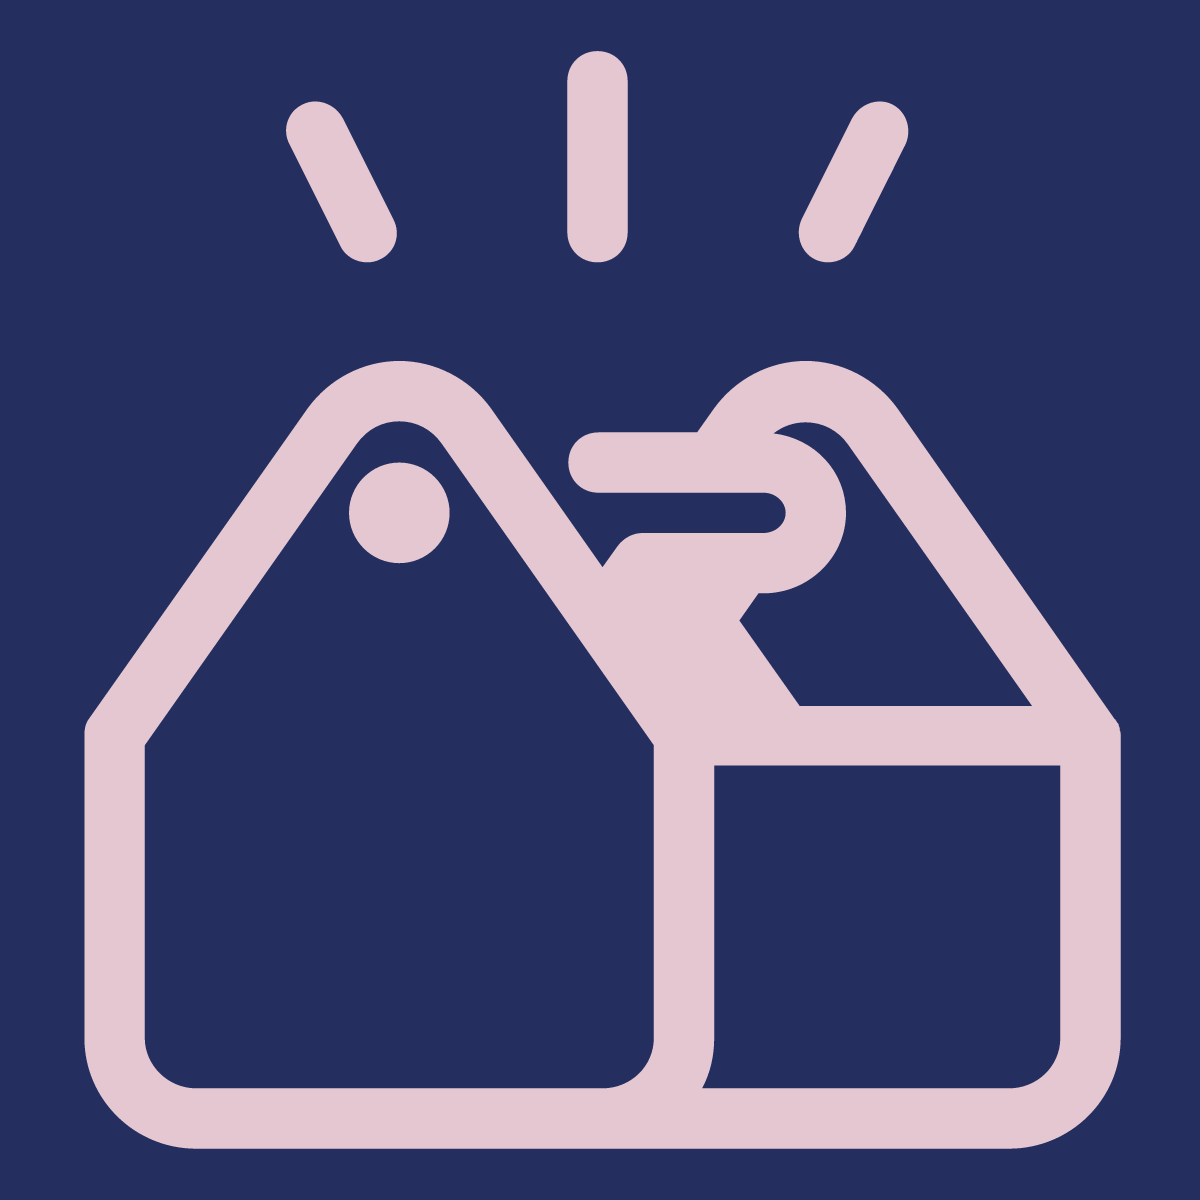 Pink toolkit icon on blue background